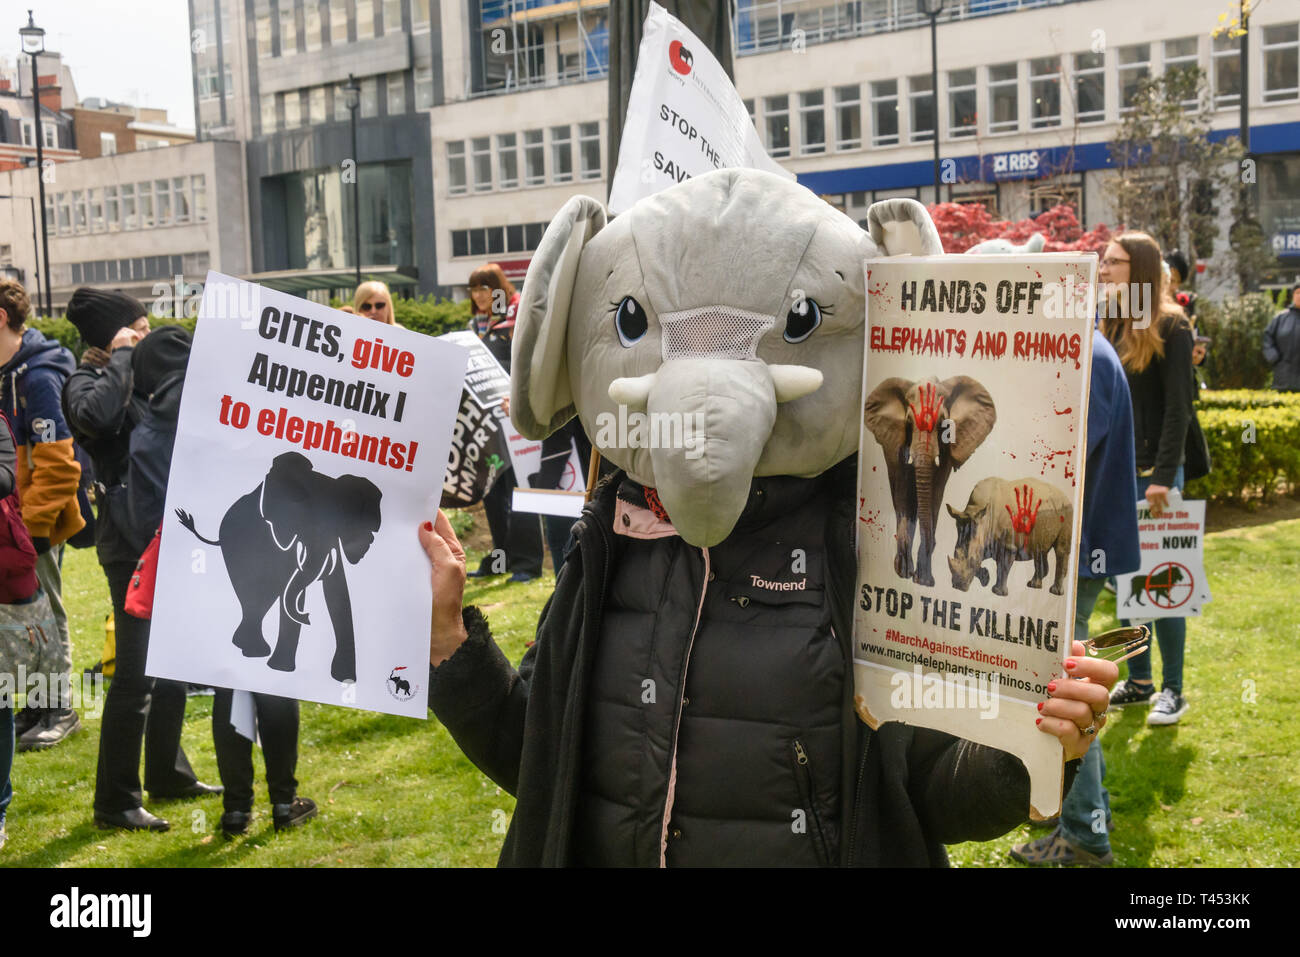 London, UK. 13th April 2014. A campaigner wearing an elephant head in Cavendish Square before the march through London  to a rally opposite Downing St as a part of the 2019 Global March for Elephants and Rhinos. They called on the UK government to impose a ban on the import of hunting trophies of endangered species to the UK, and supported an increase in the protection under CITES for elephants and opposed attempts to downgrade protection of endangered species or reopen trade in ivory and other body parts. Peter Marshall/Alamy Live News Stock Photo